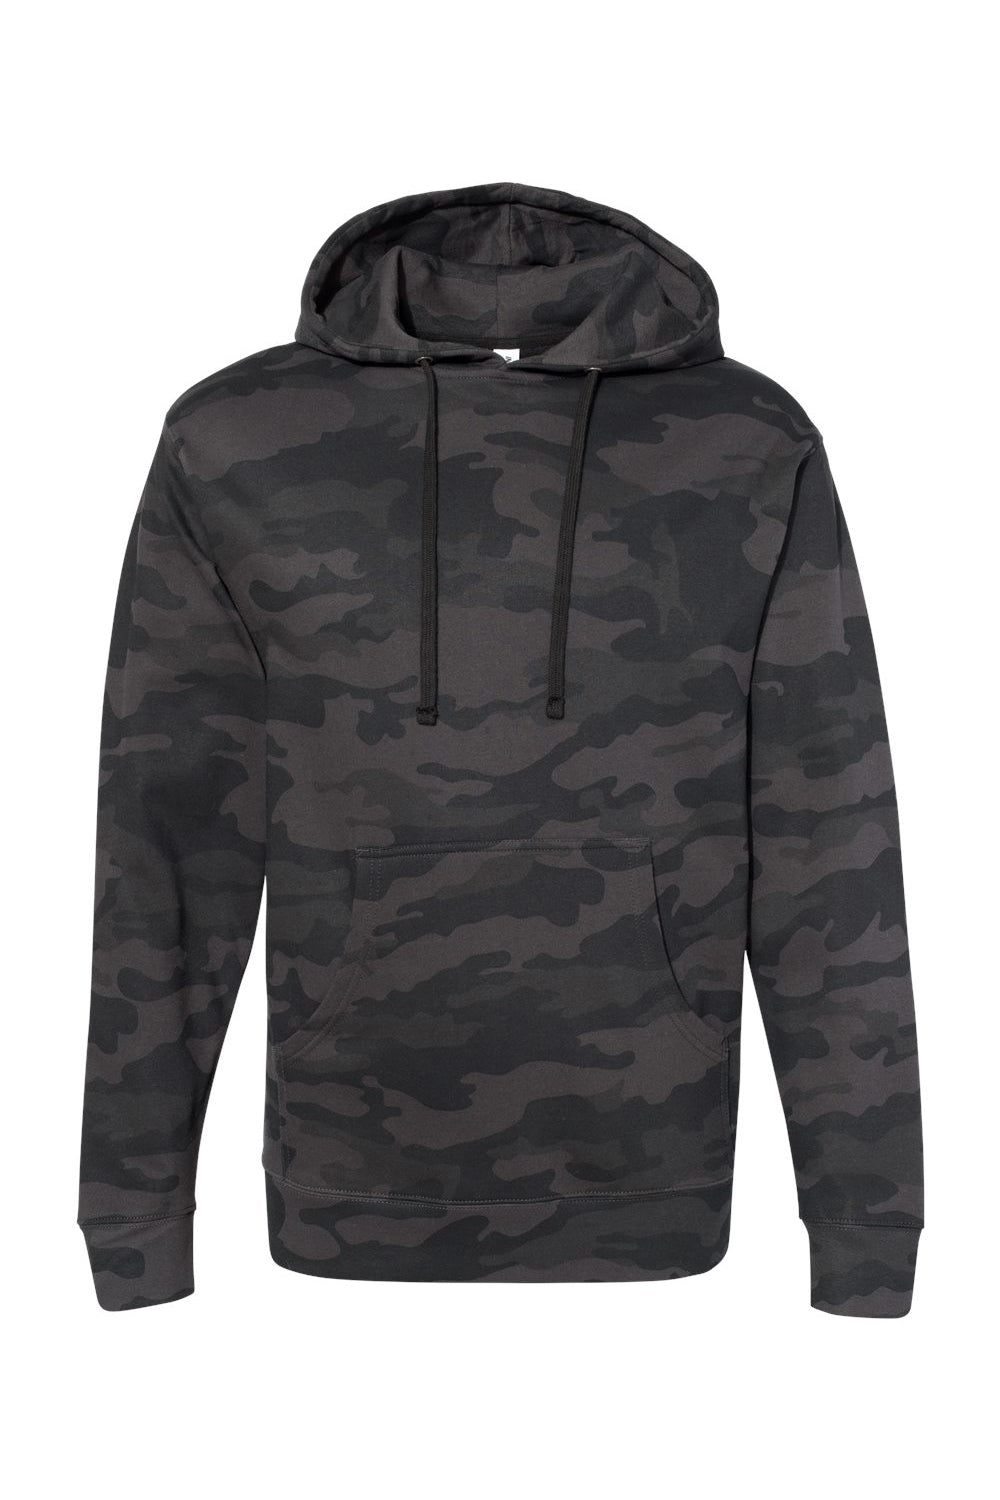 Independent Trading Co. SS4500 Mens Hooded Sweatshirt Hoodie Black Camo Flat Front